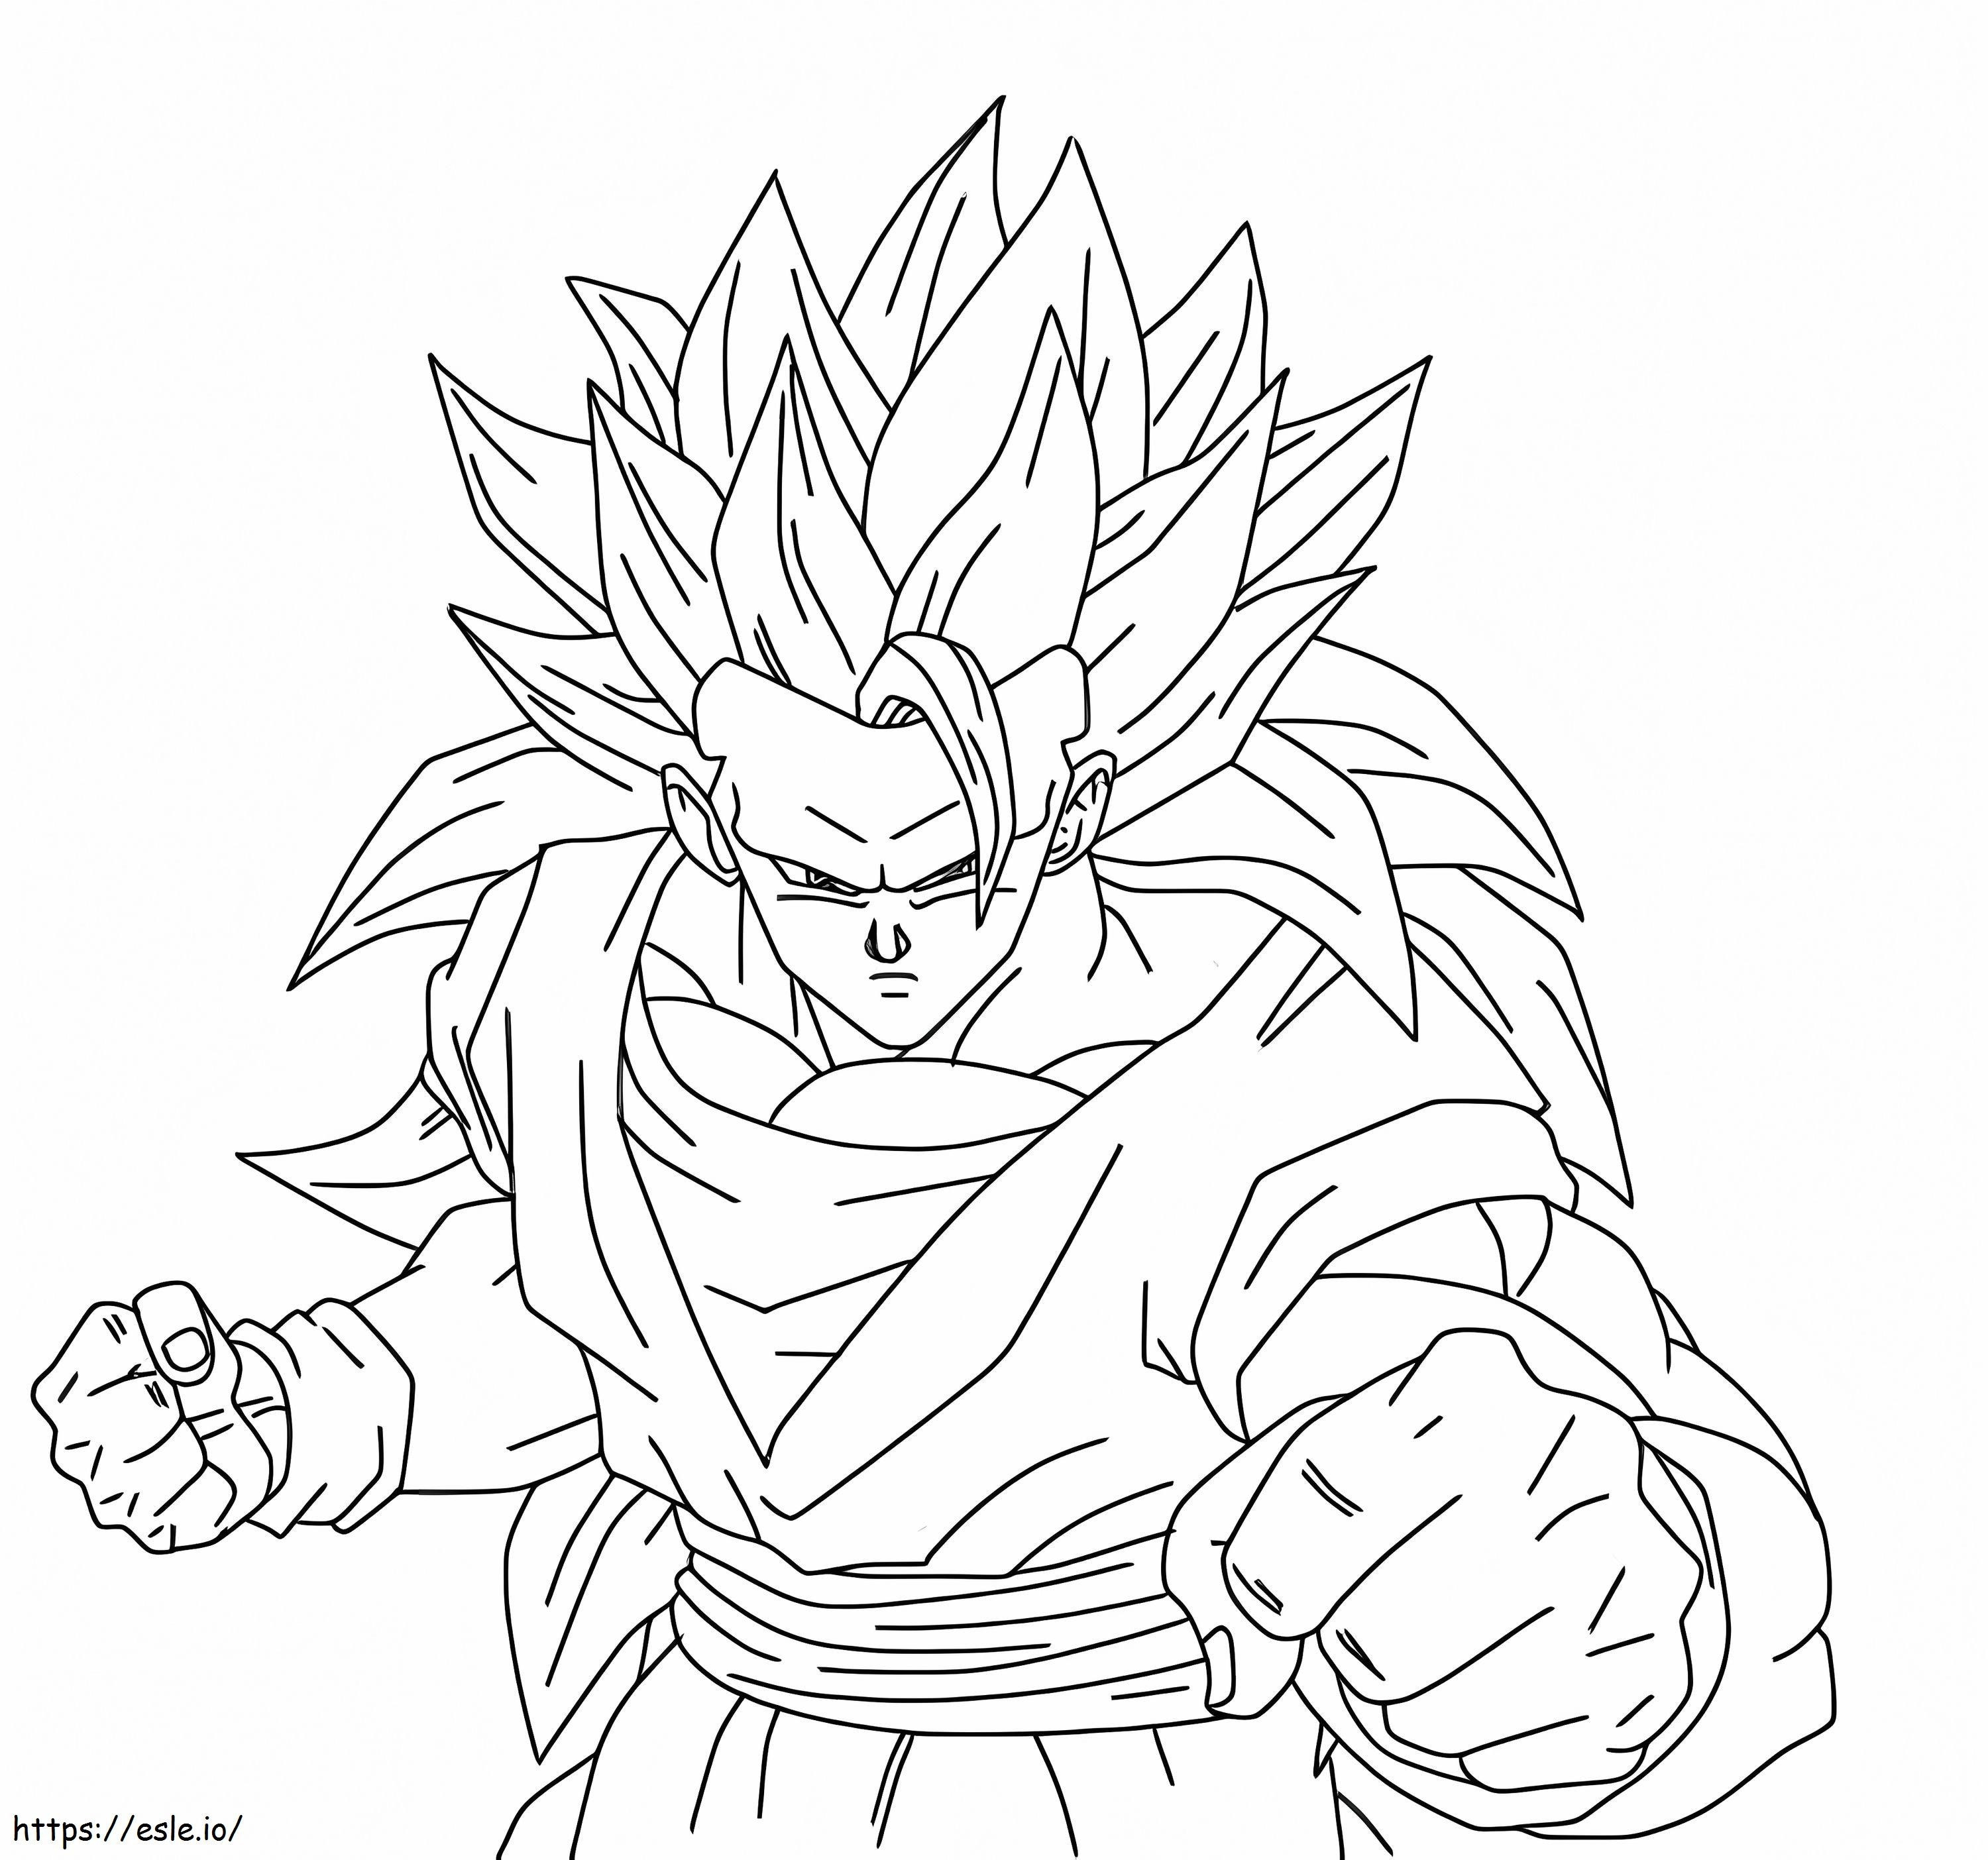 Son Goku Fighting coloring page